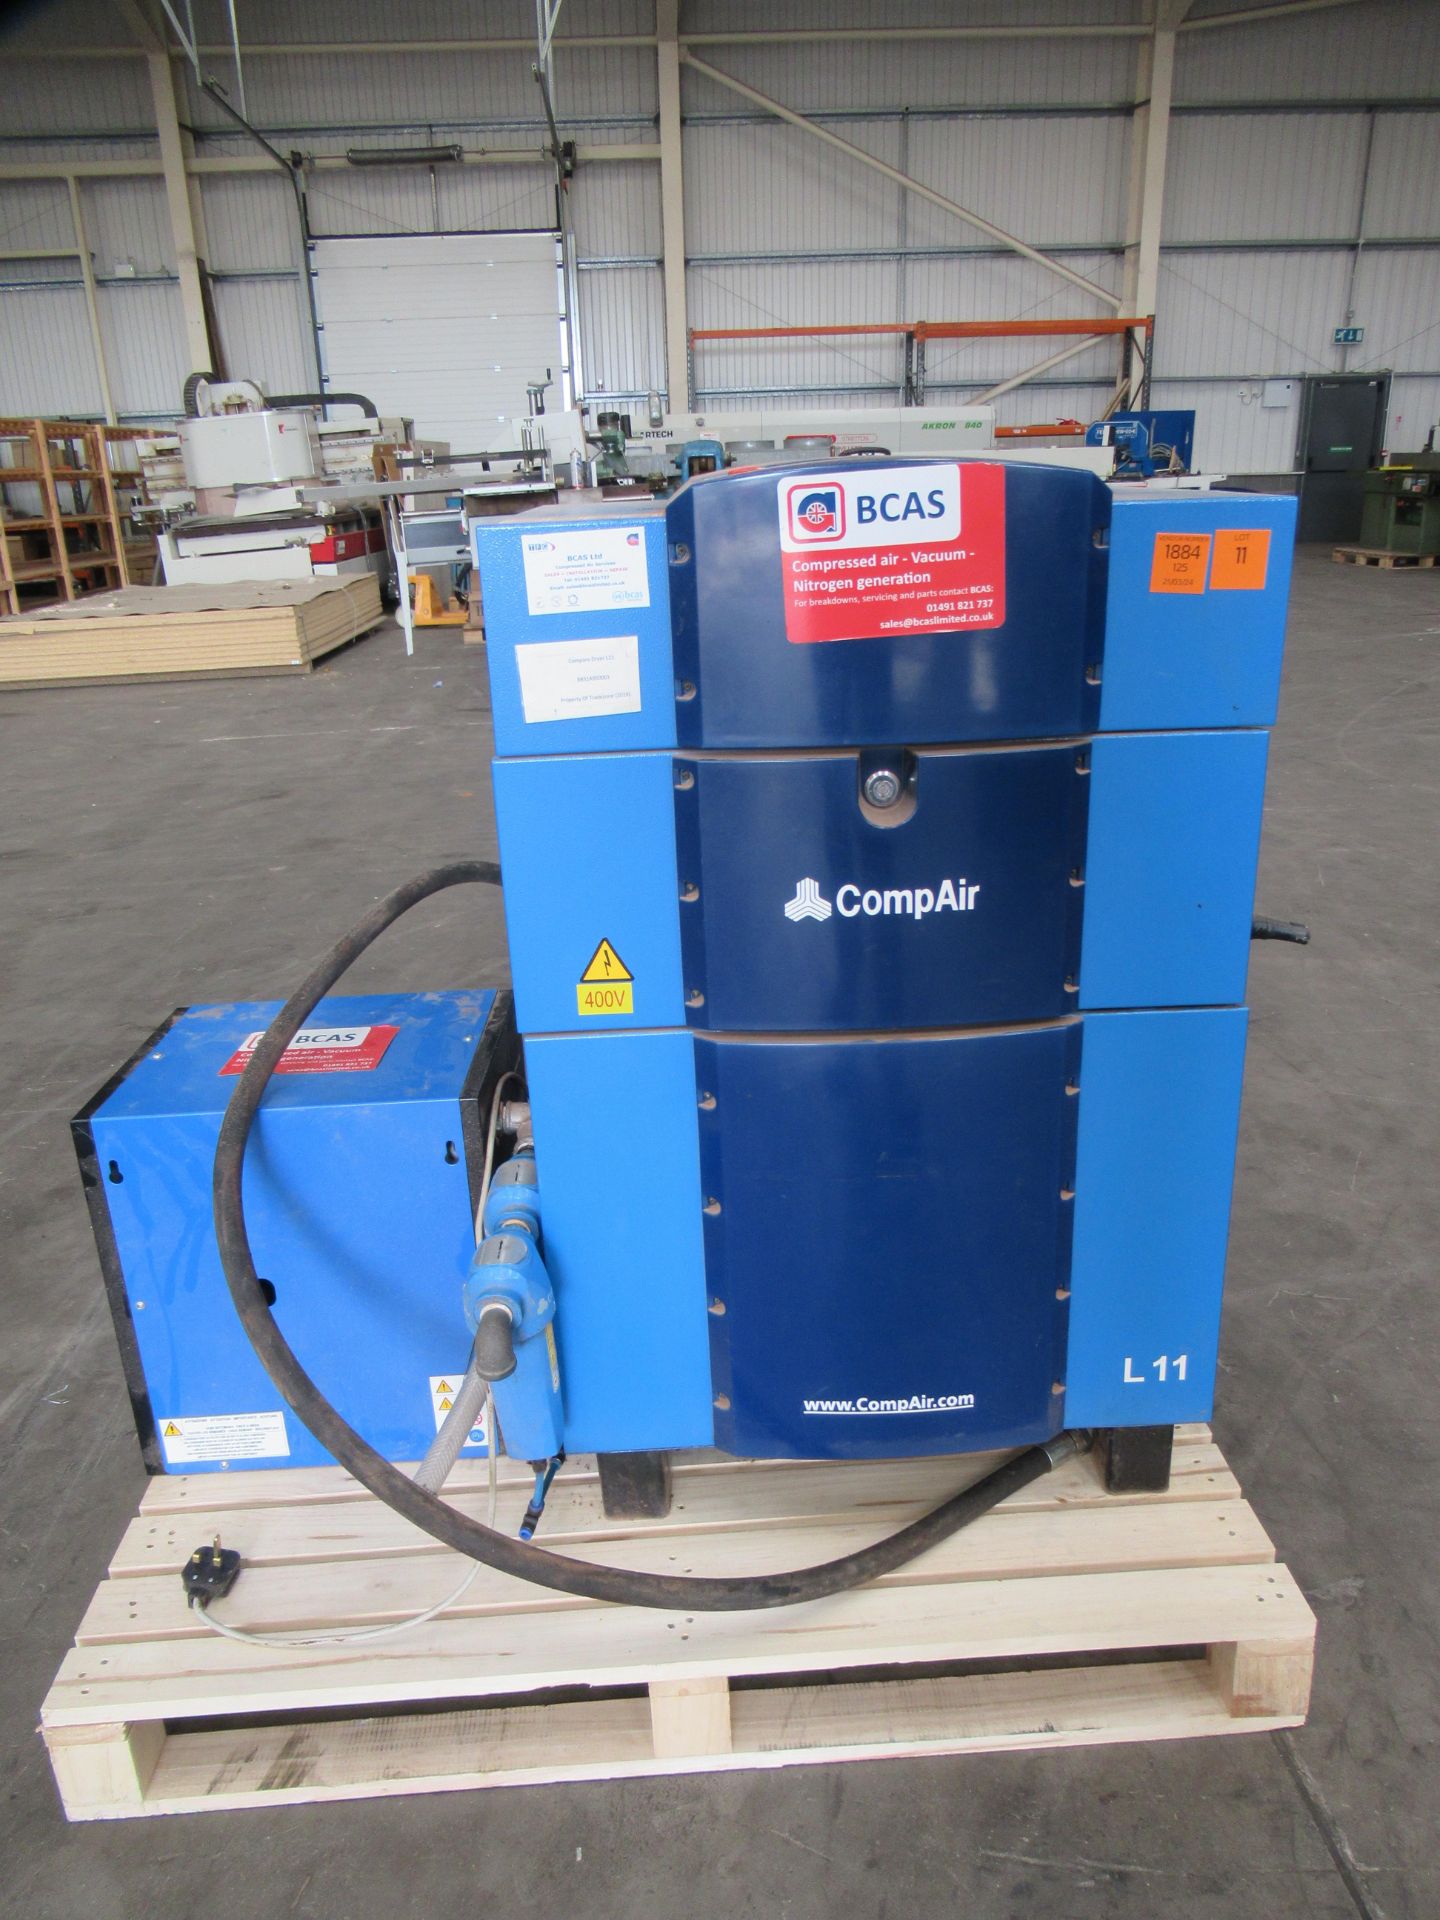 CompAir L11 Screw Compressor with Tundra Air Dryer and ABAC 200L Air Receiver Tank.